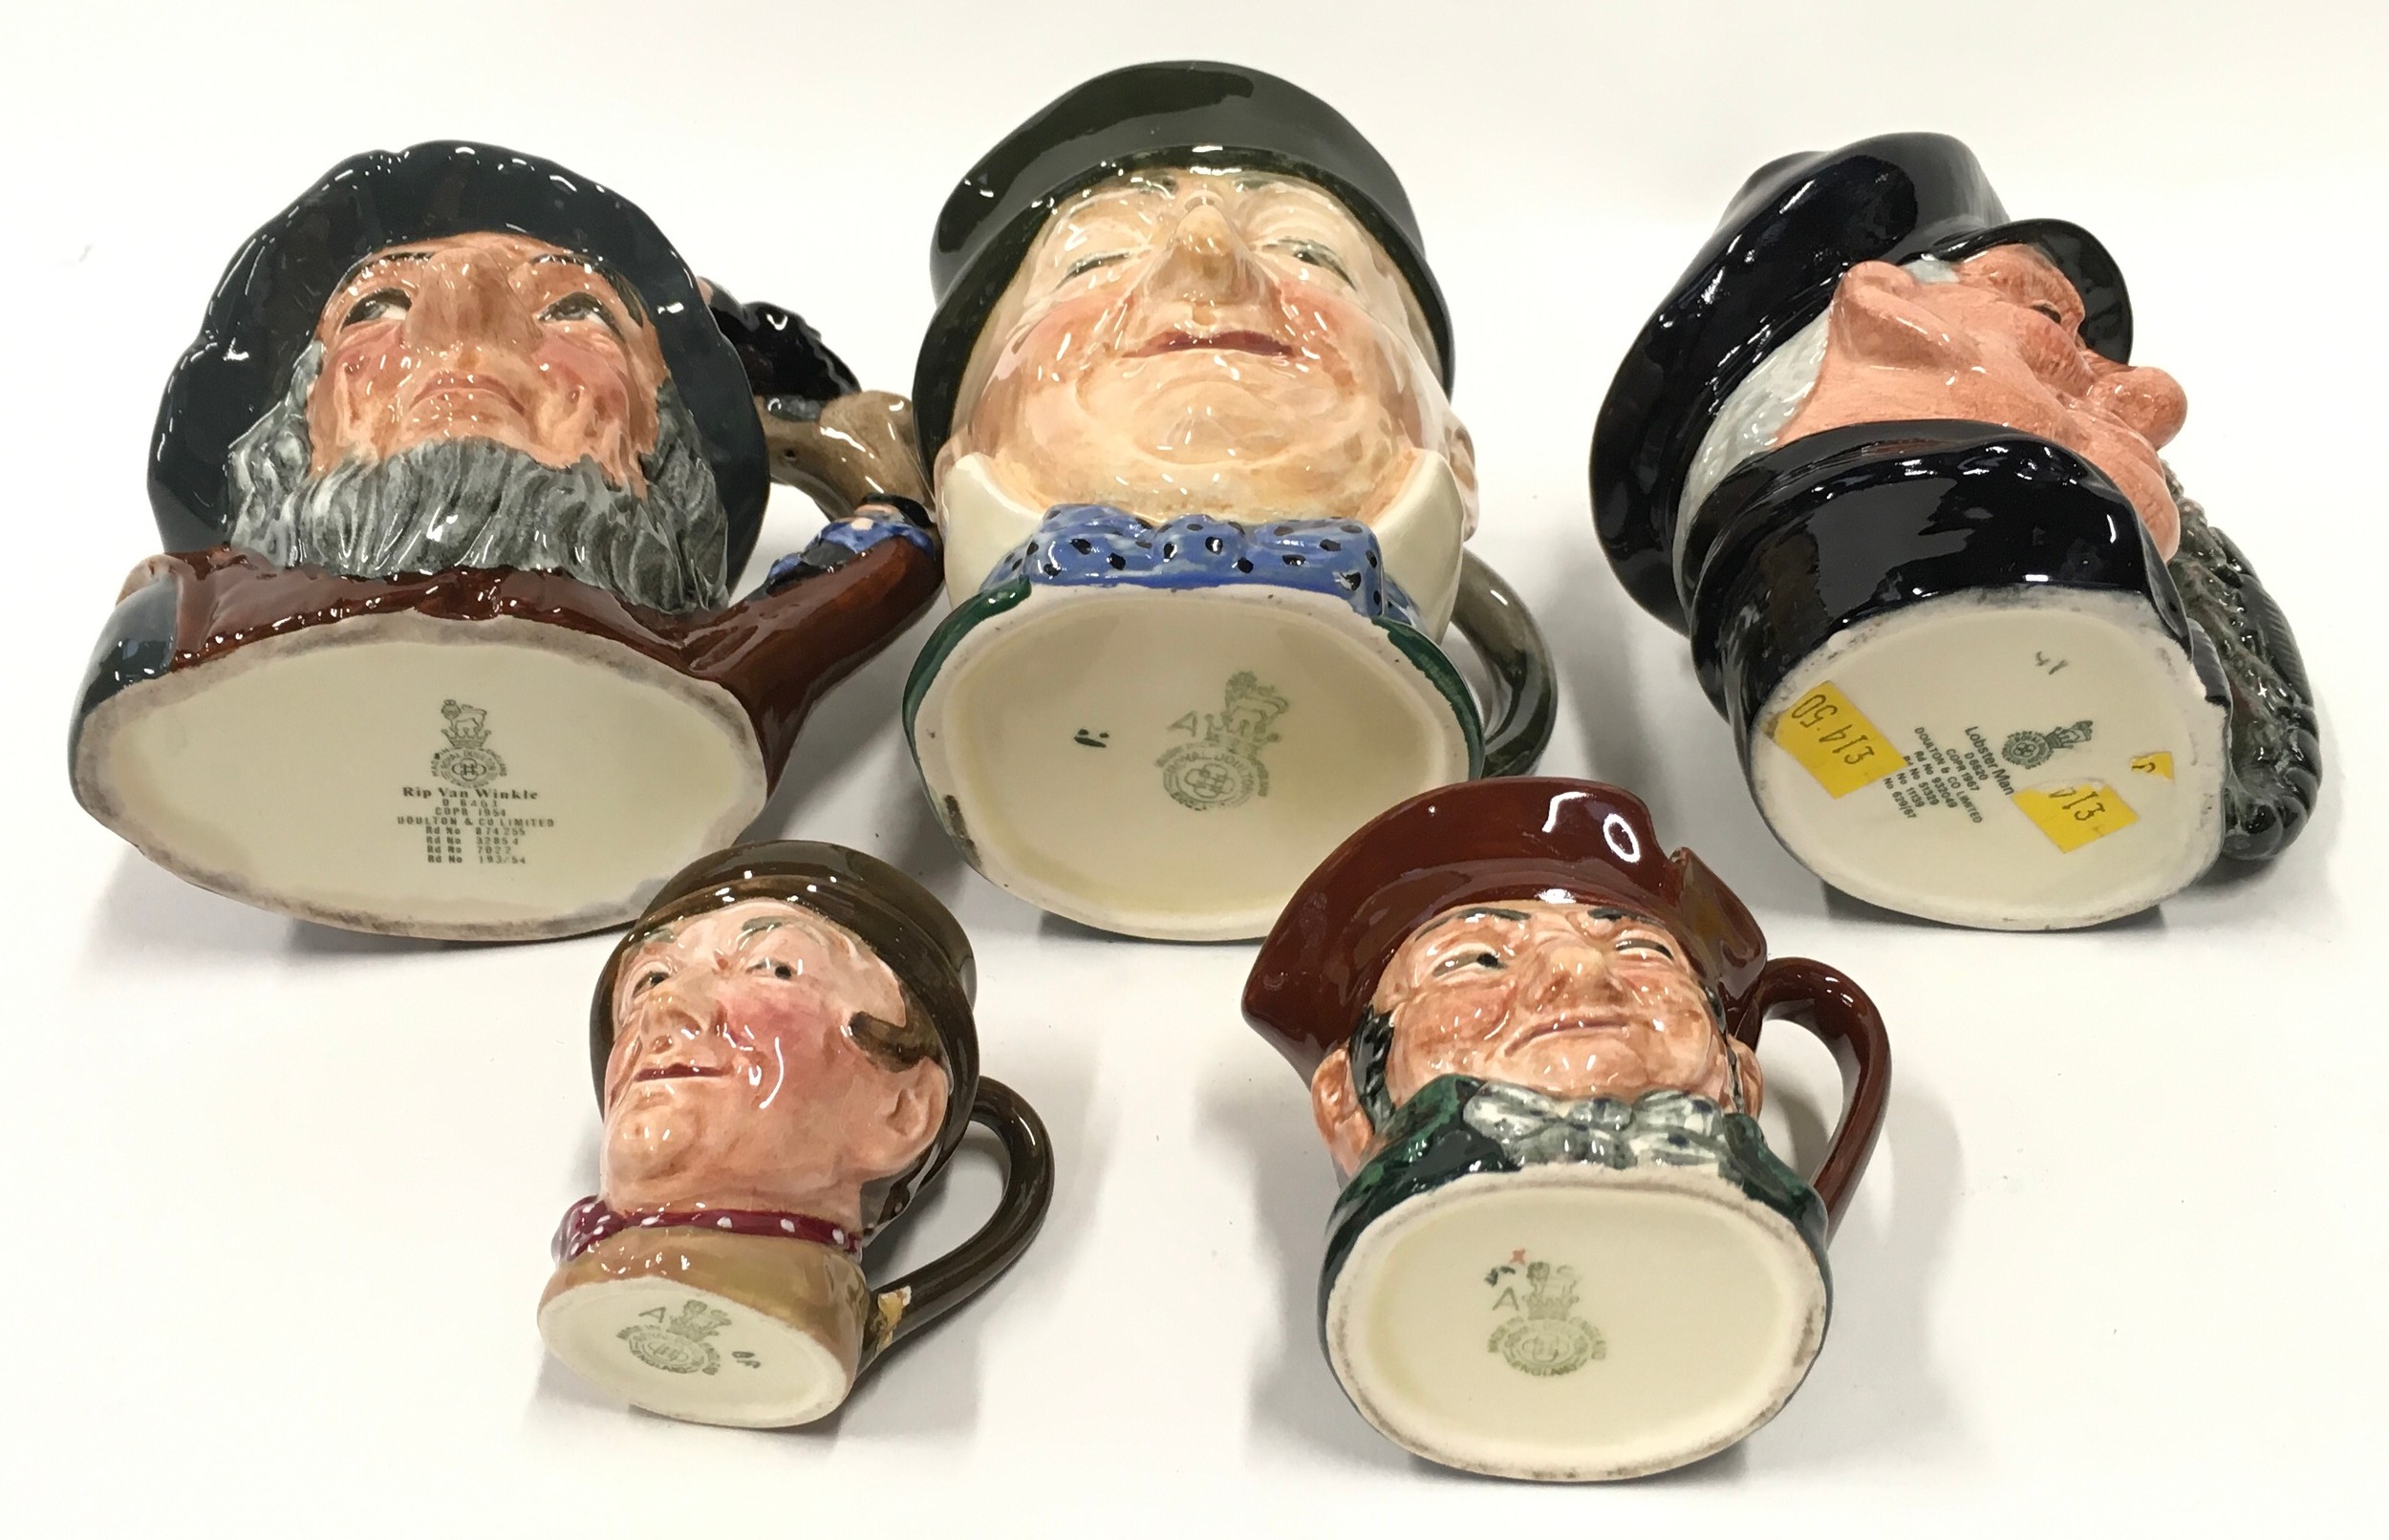 Eleven toby character jugs with examples by Royal Doulton and Beswick. - Image 5 of 5